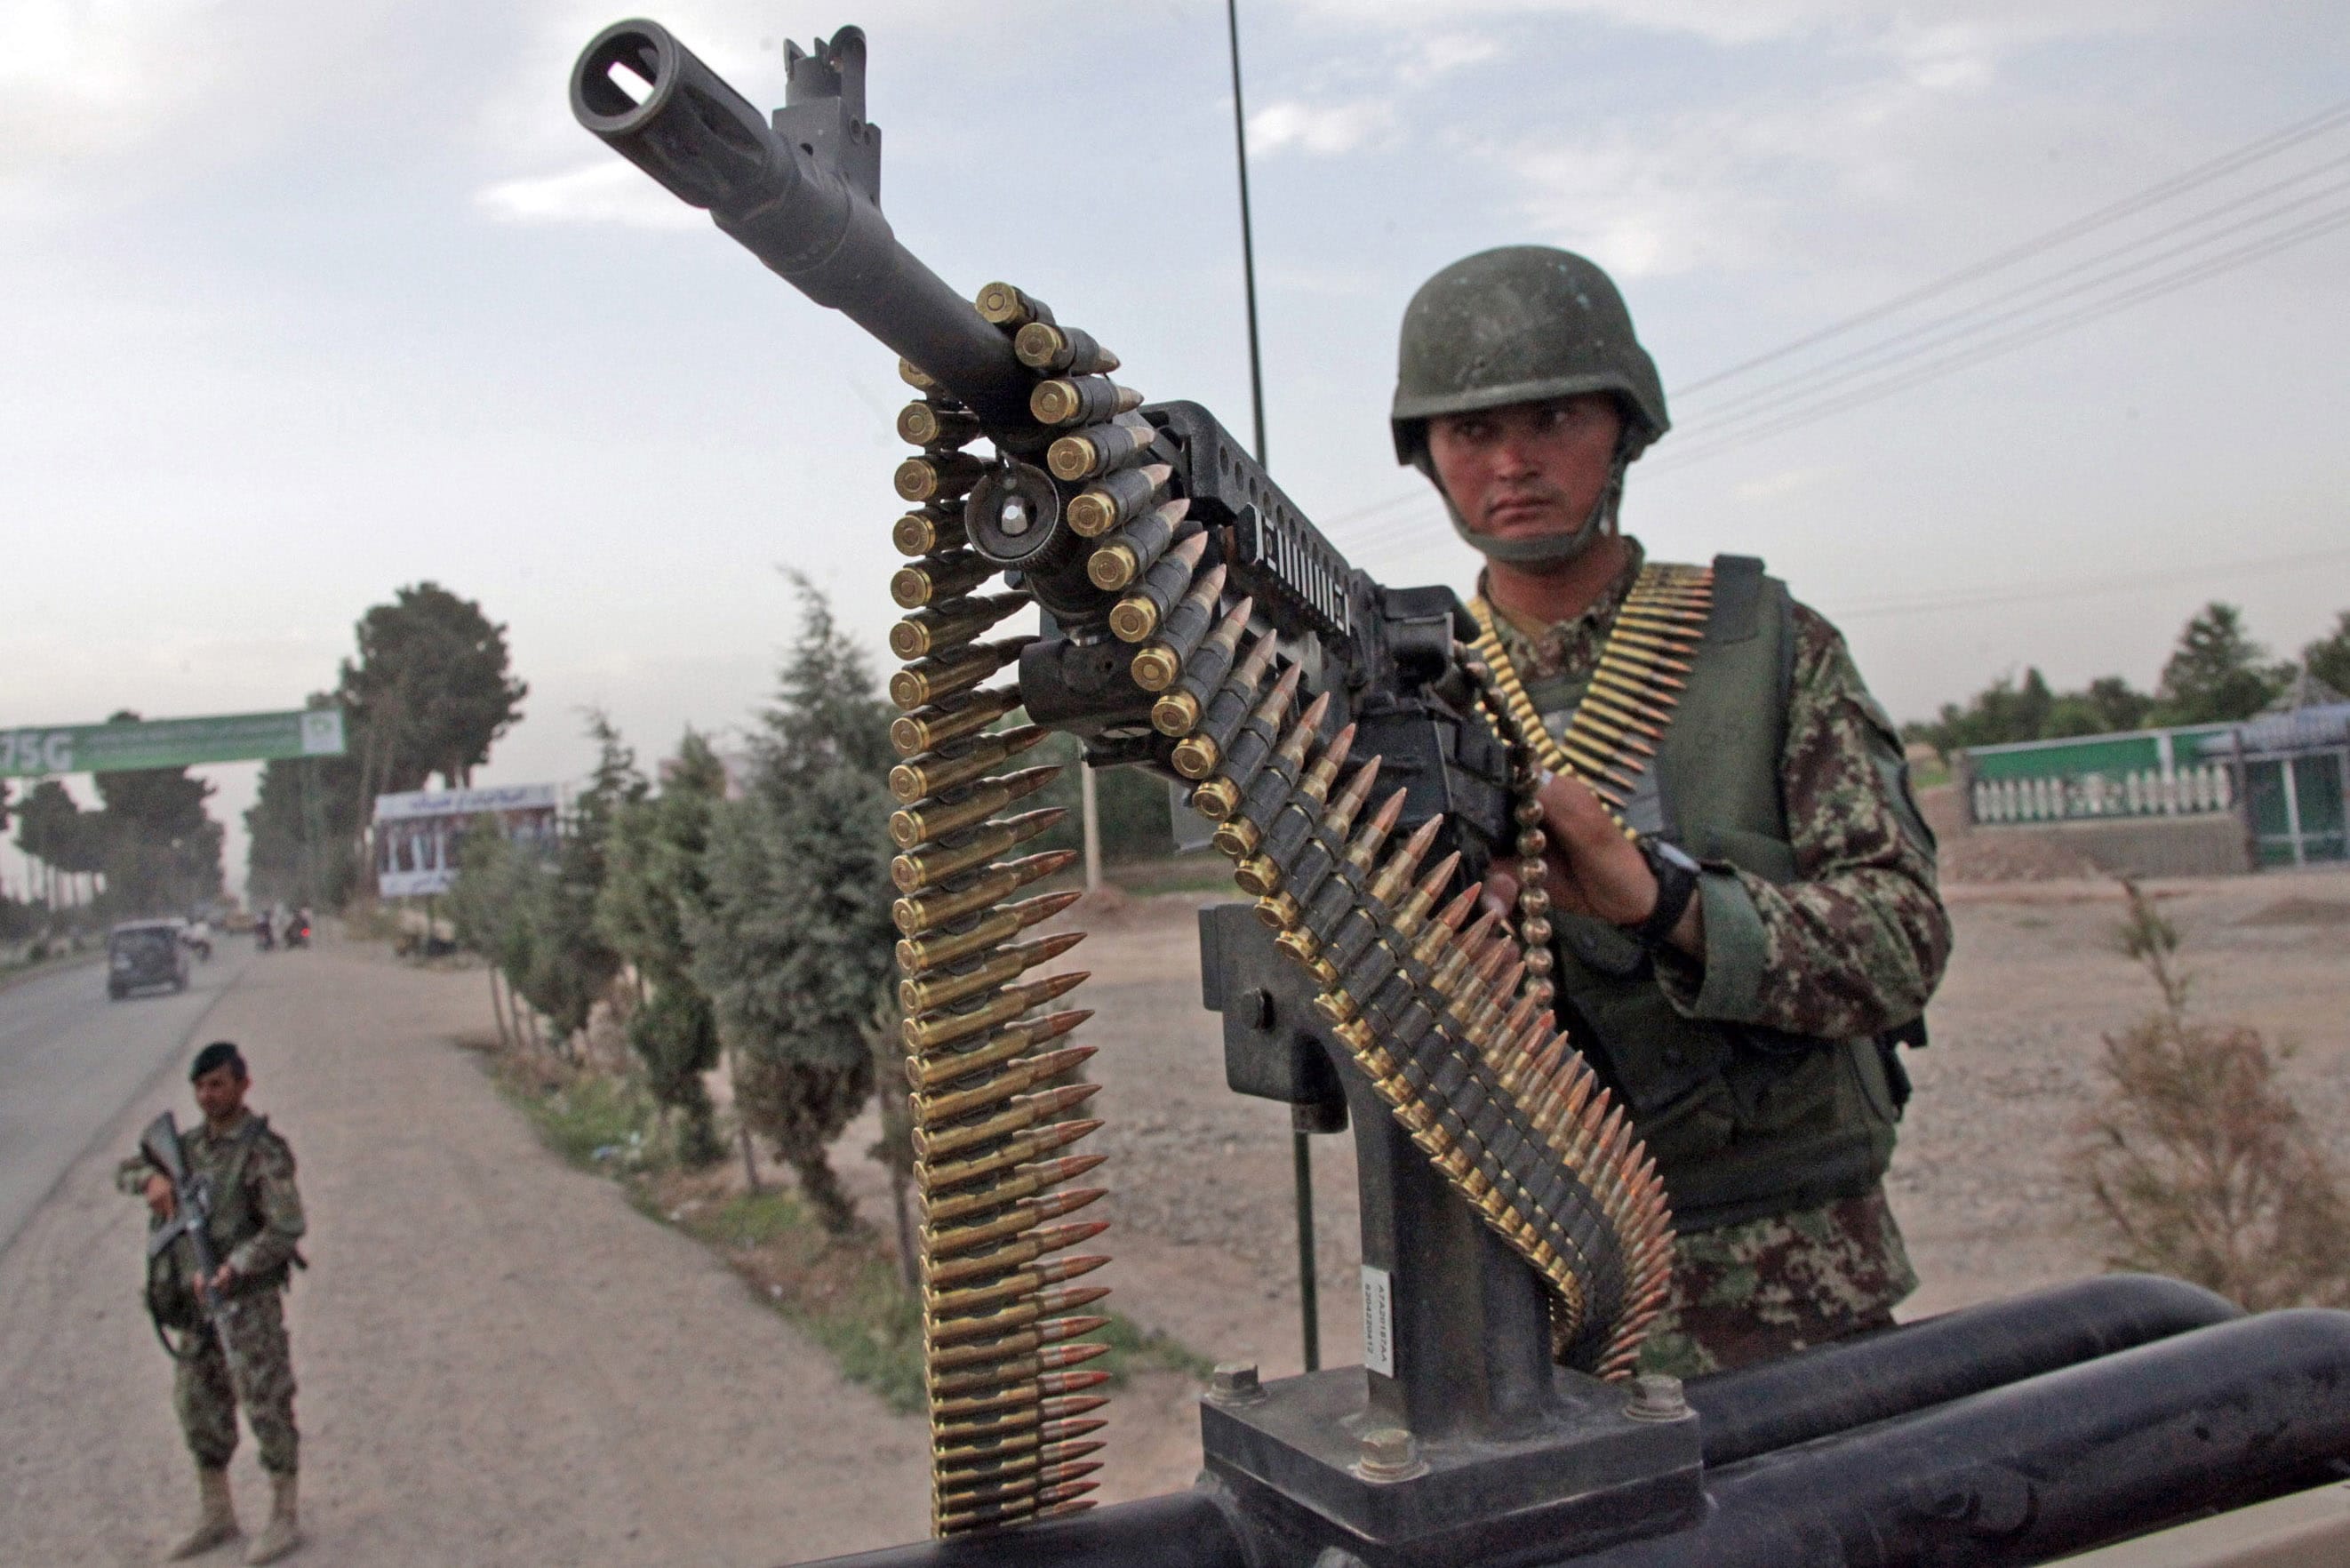 Afghanistan National Army soldiers stand alert Friday in a street in Herat, west of Kabul, Afghanistan.